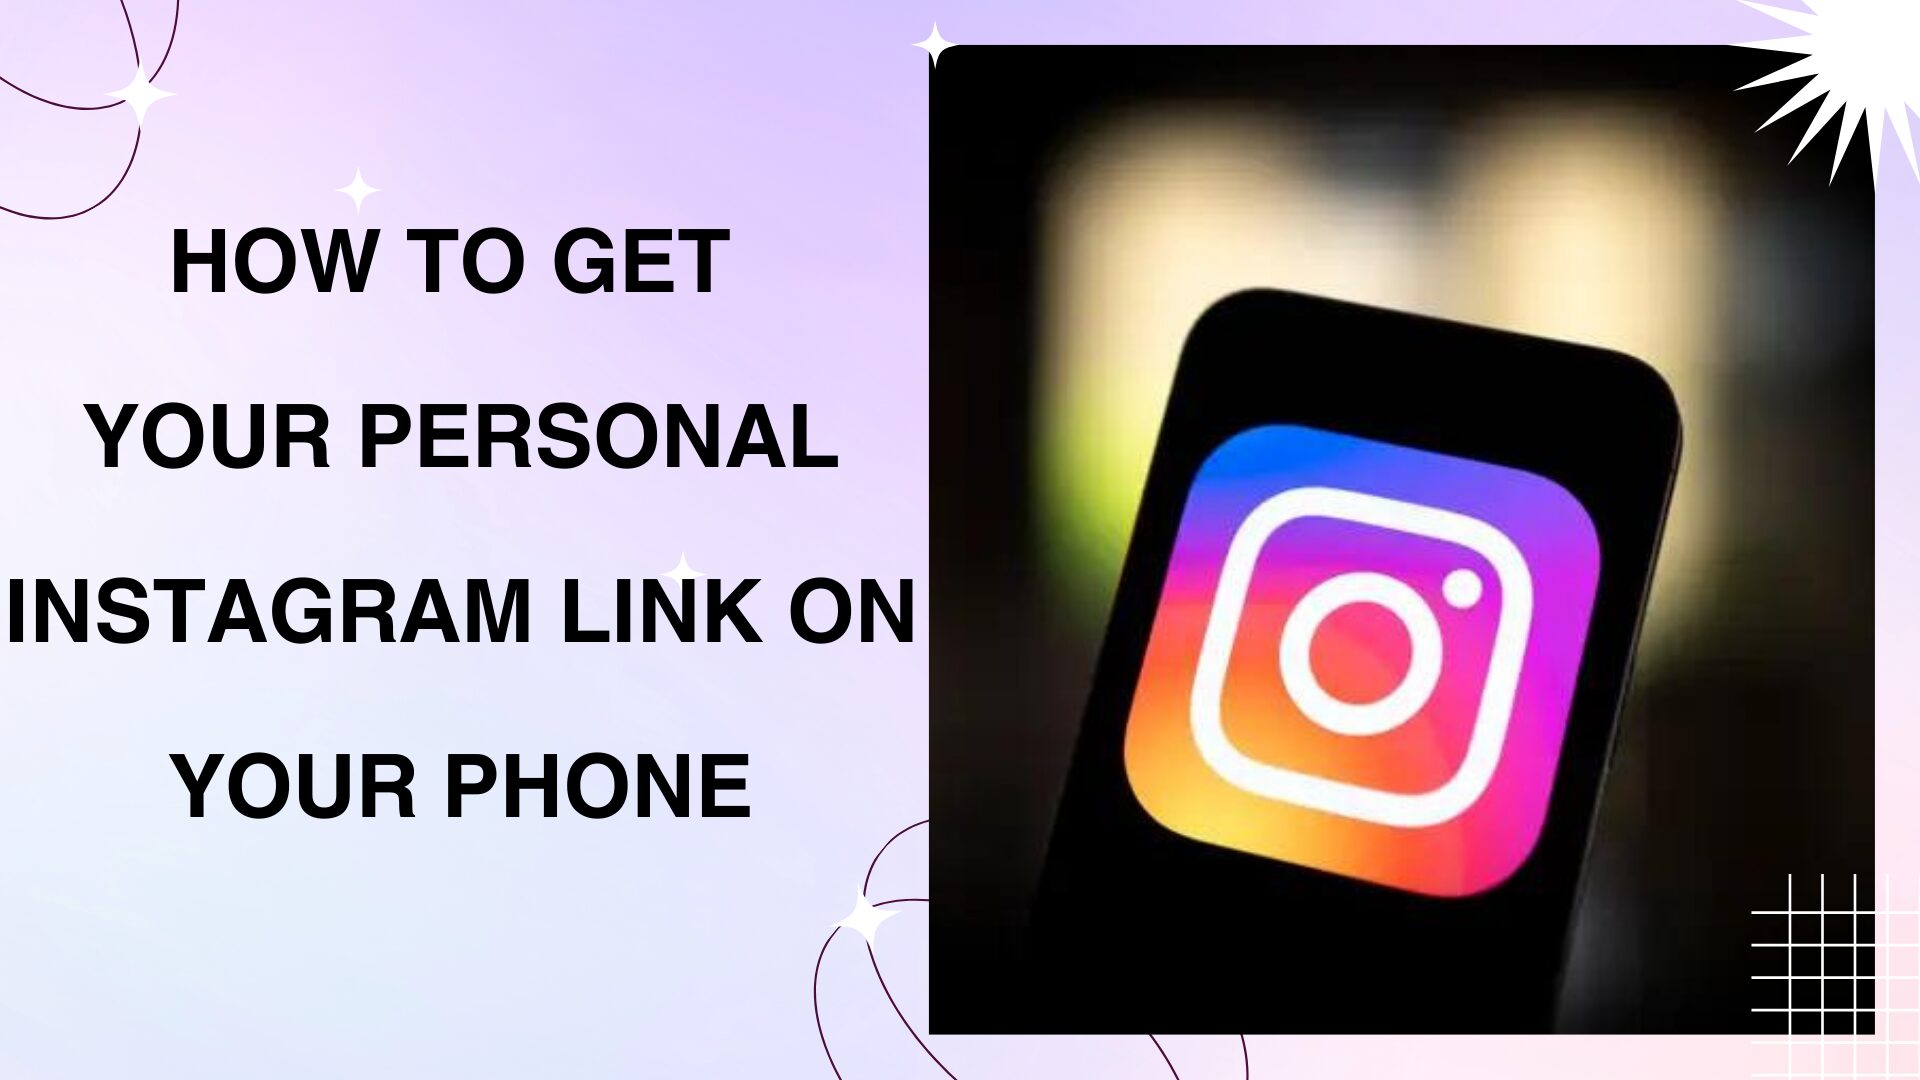 How to Get your personal Instagram link on your phone